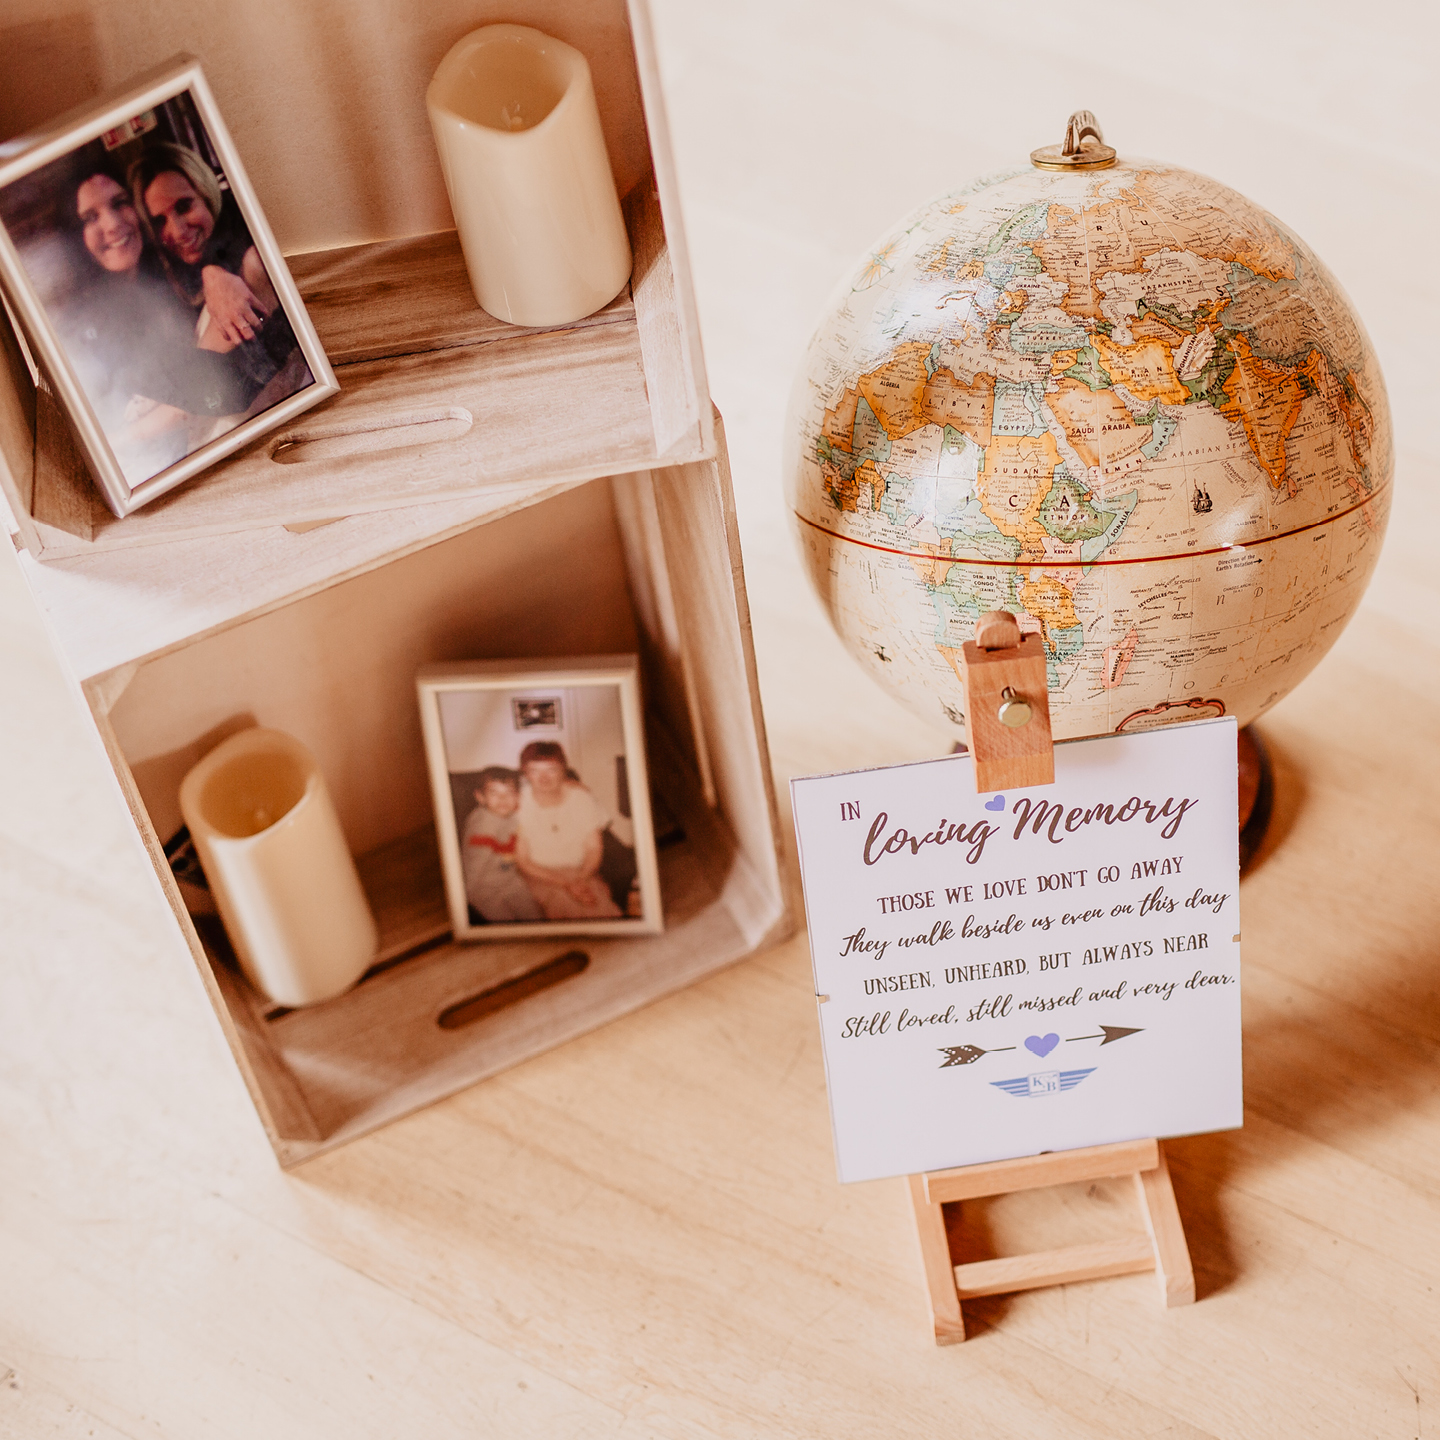 A special space to remember lost loved ones on your wedding day